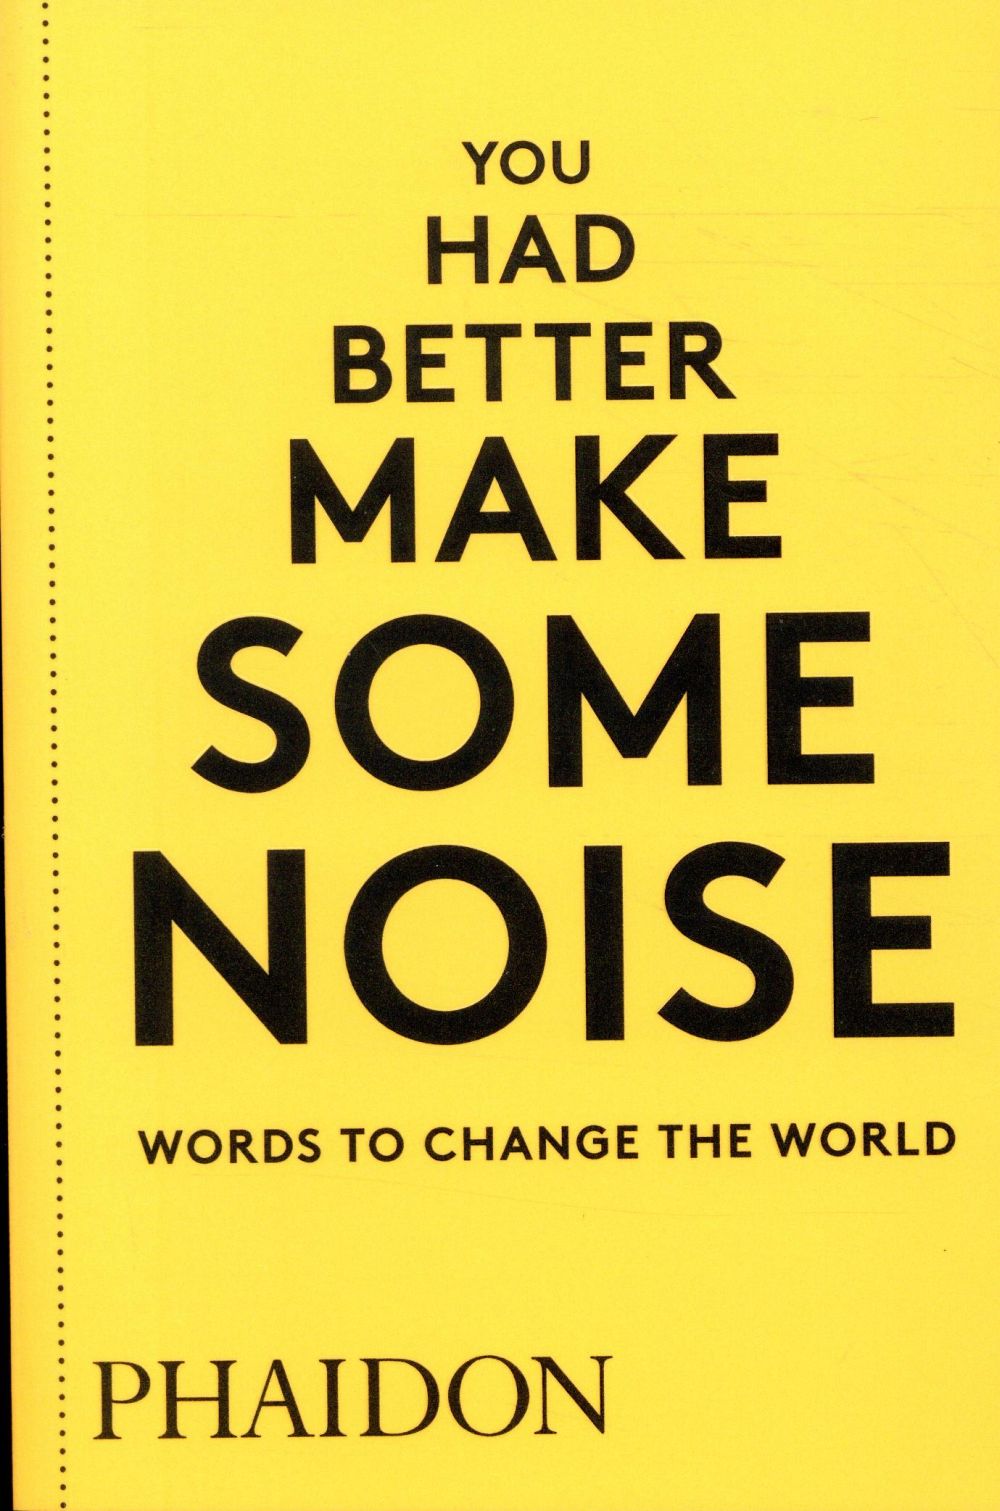 YOU HAD BETTER MAKE SOME NOISE - WORDS TO CHANGE THE WORLD